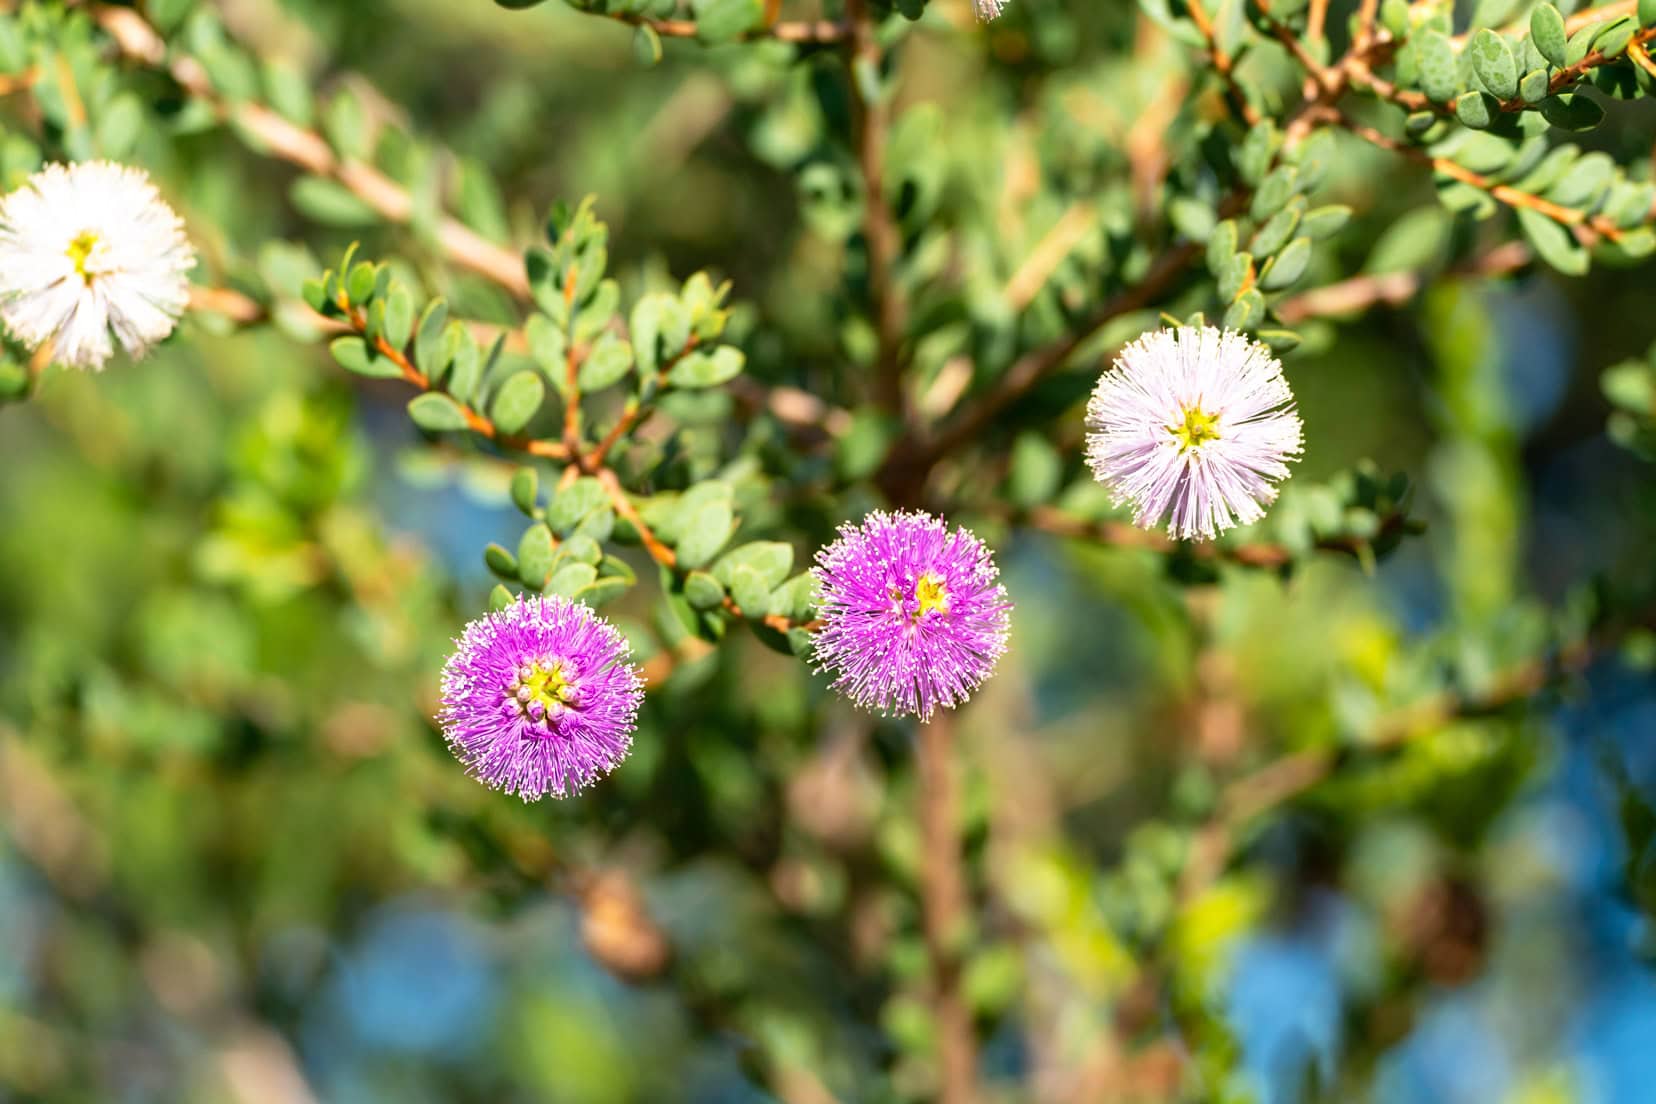 Honey Myrtle - pink and white flowers that look like a firework